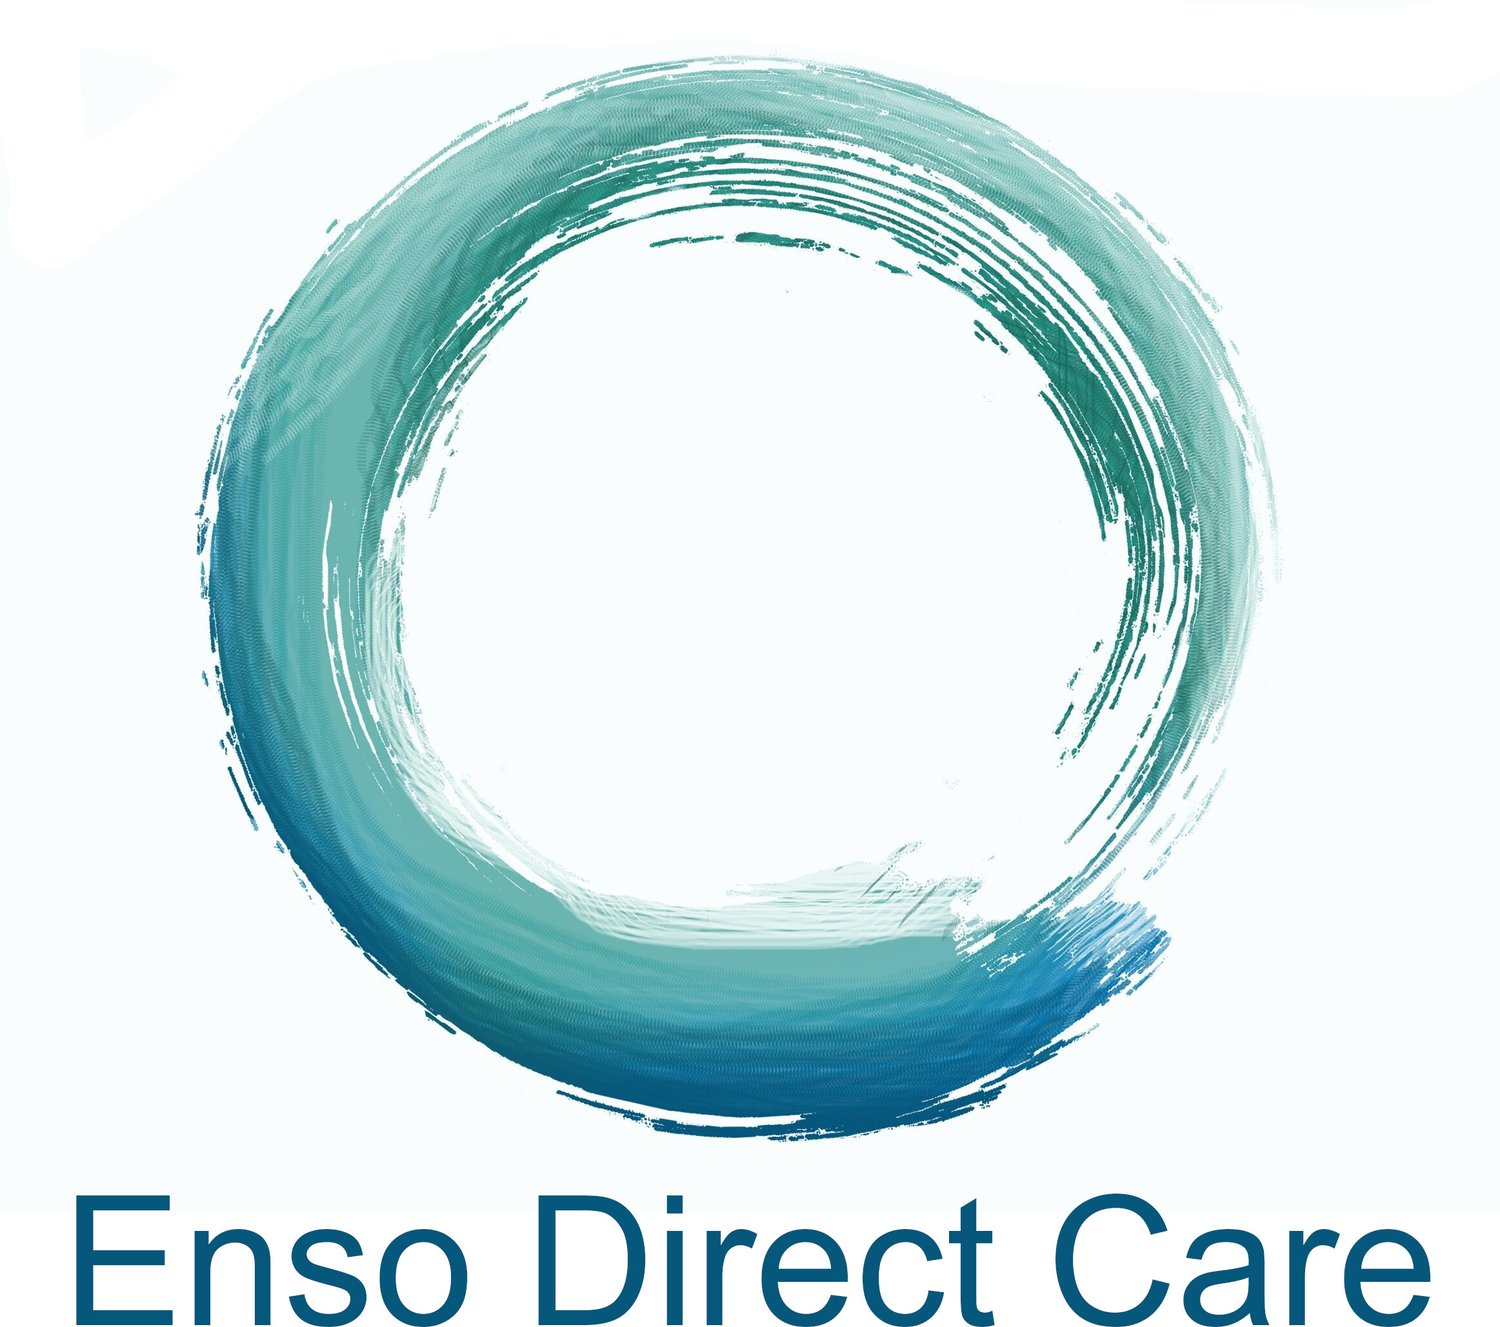 Enso Direct Care